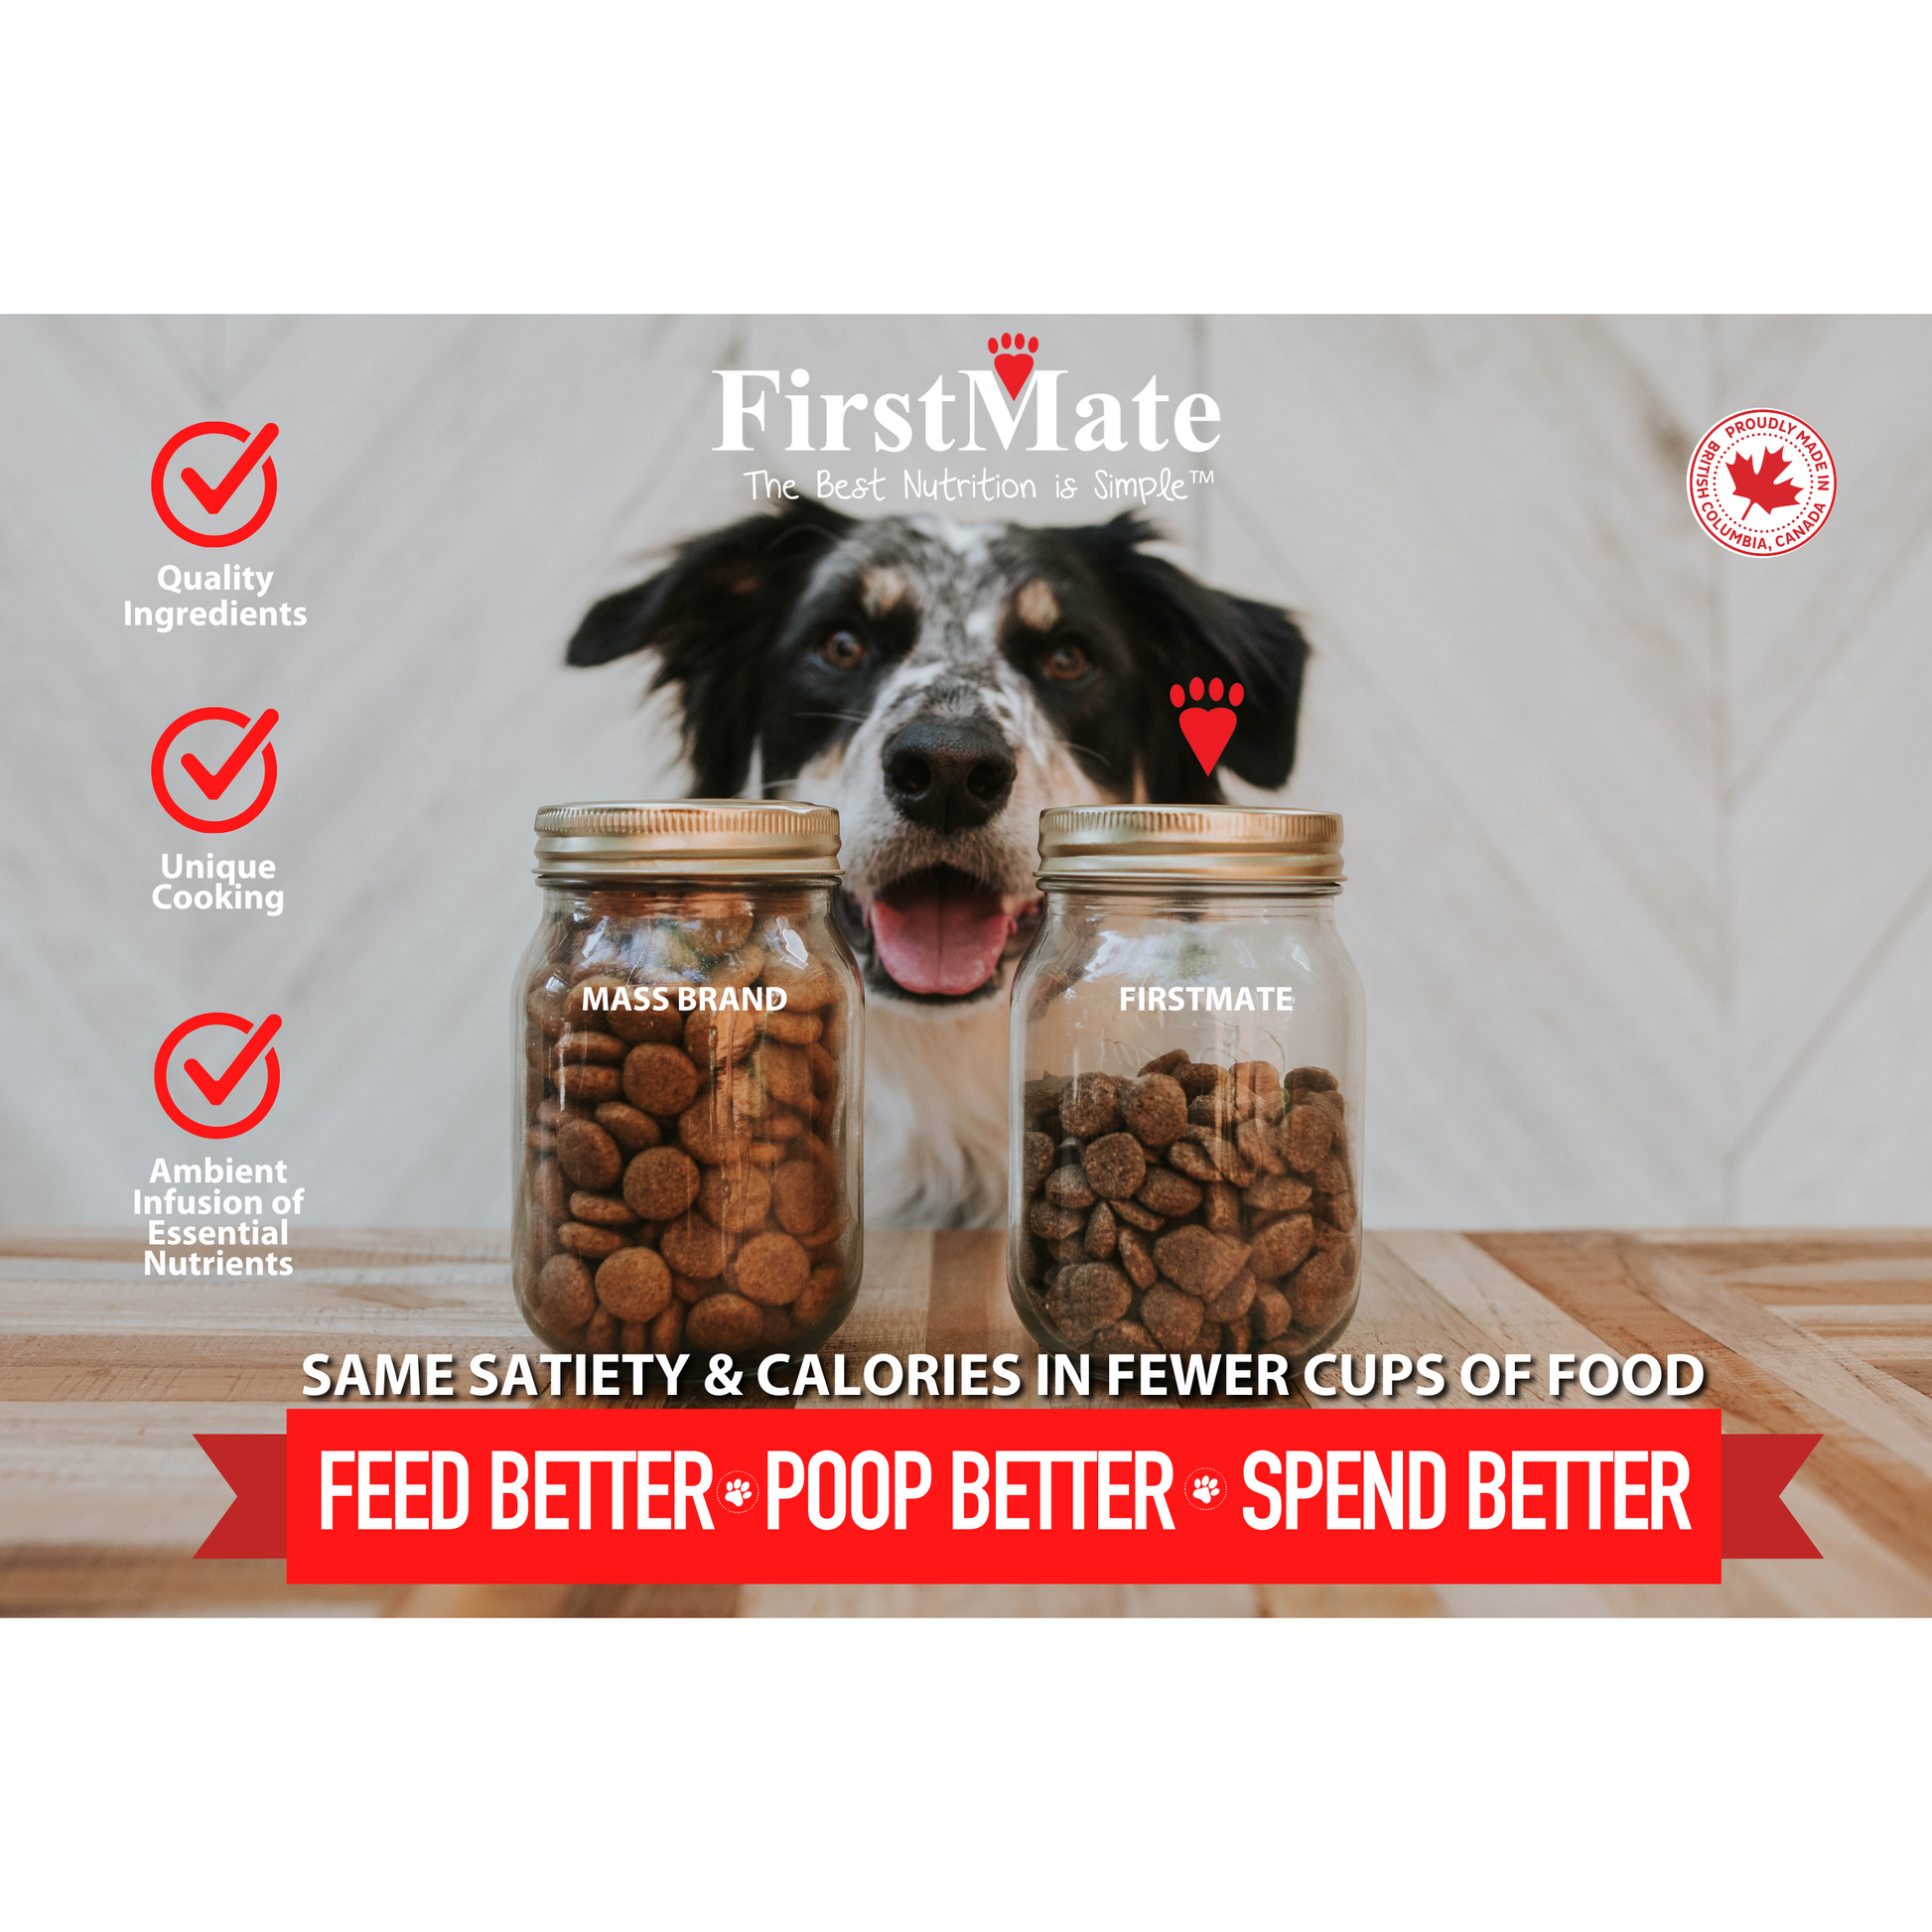 FirstMate Wild Pacific Caught Fish & Oats Dog Food  Dog Food  | PetMax Canada